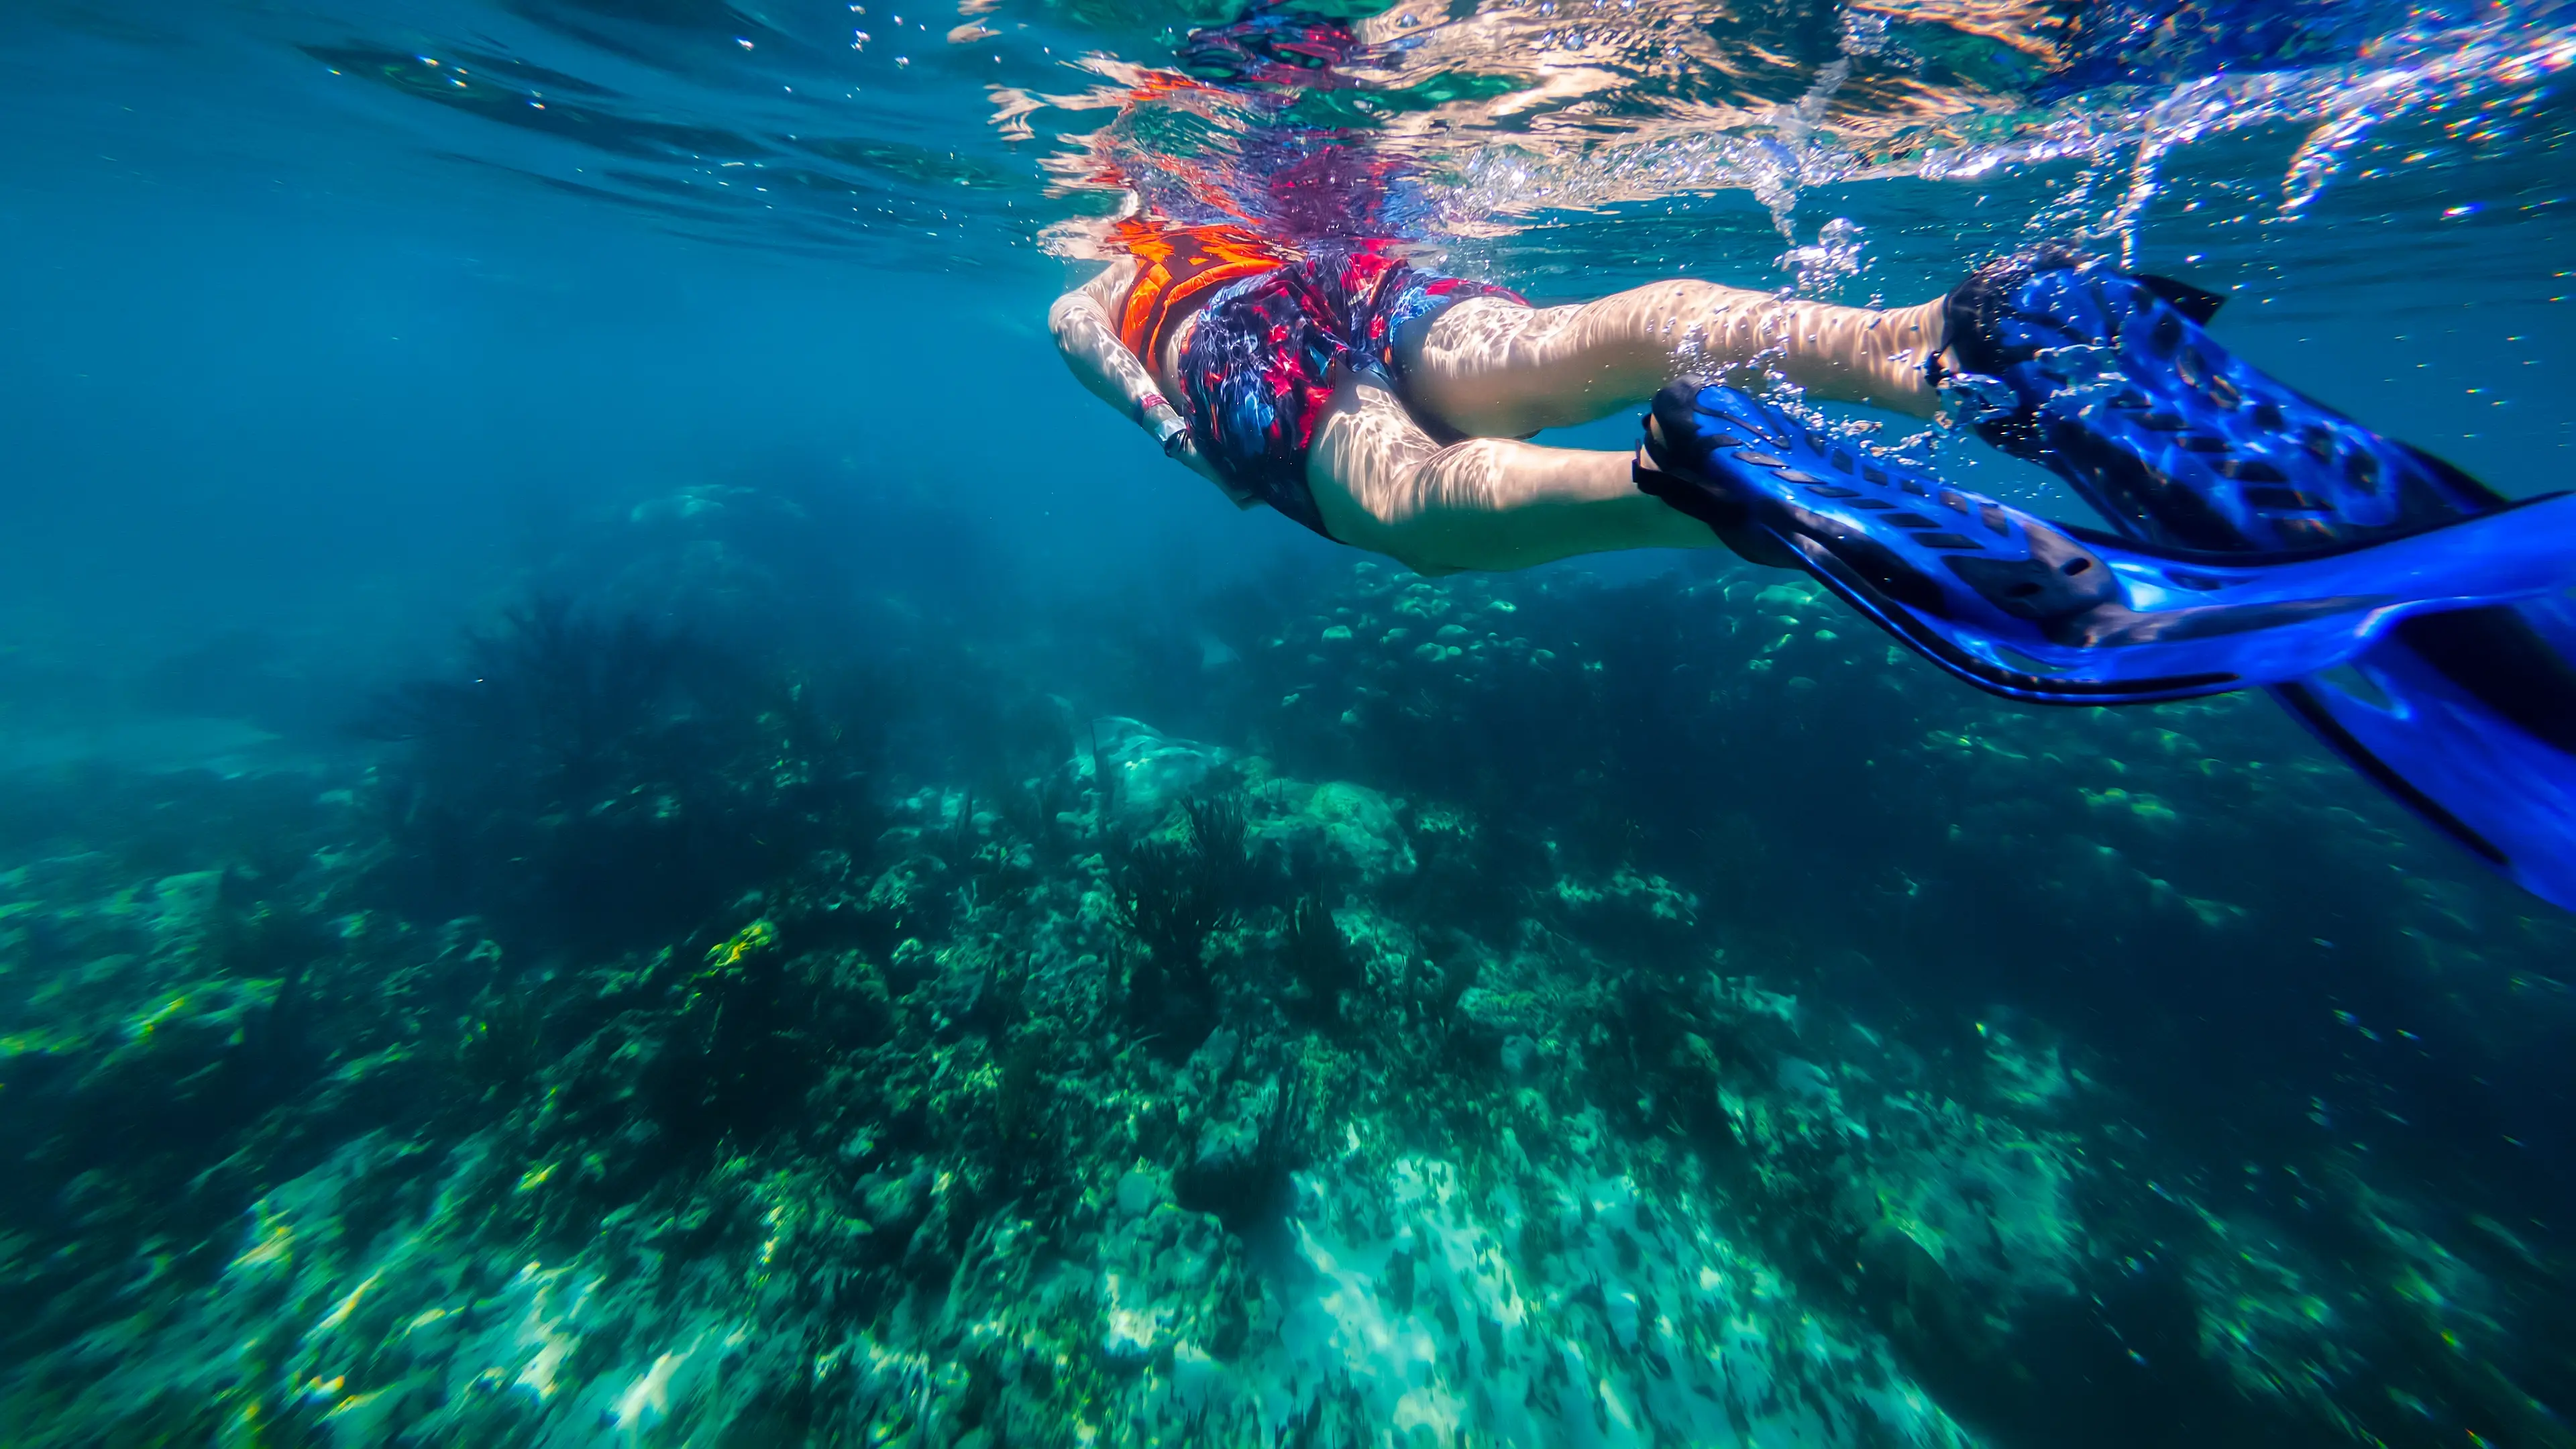 An underwater view of a swimmer snorkeling along the water's surface.